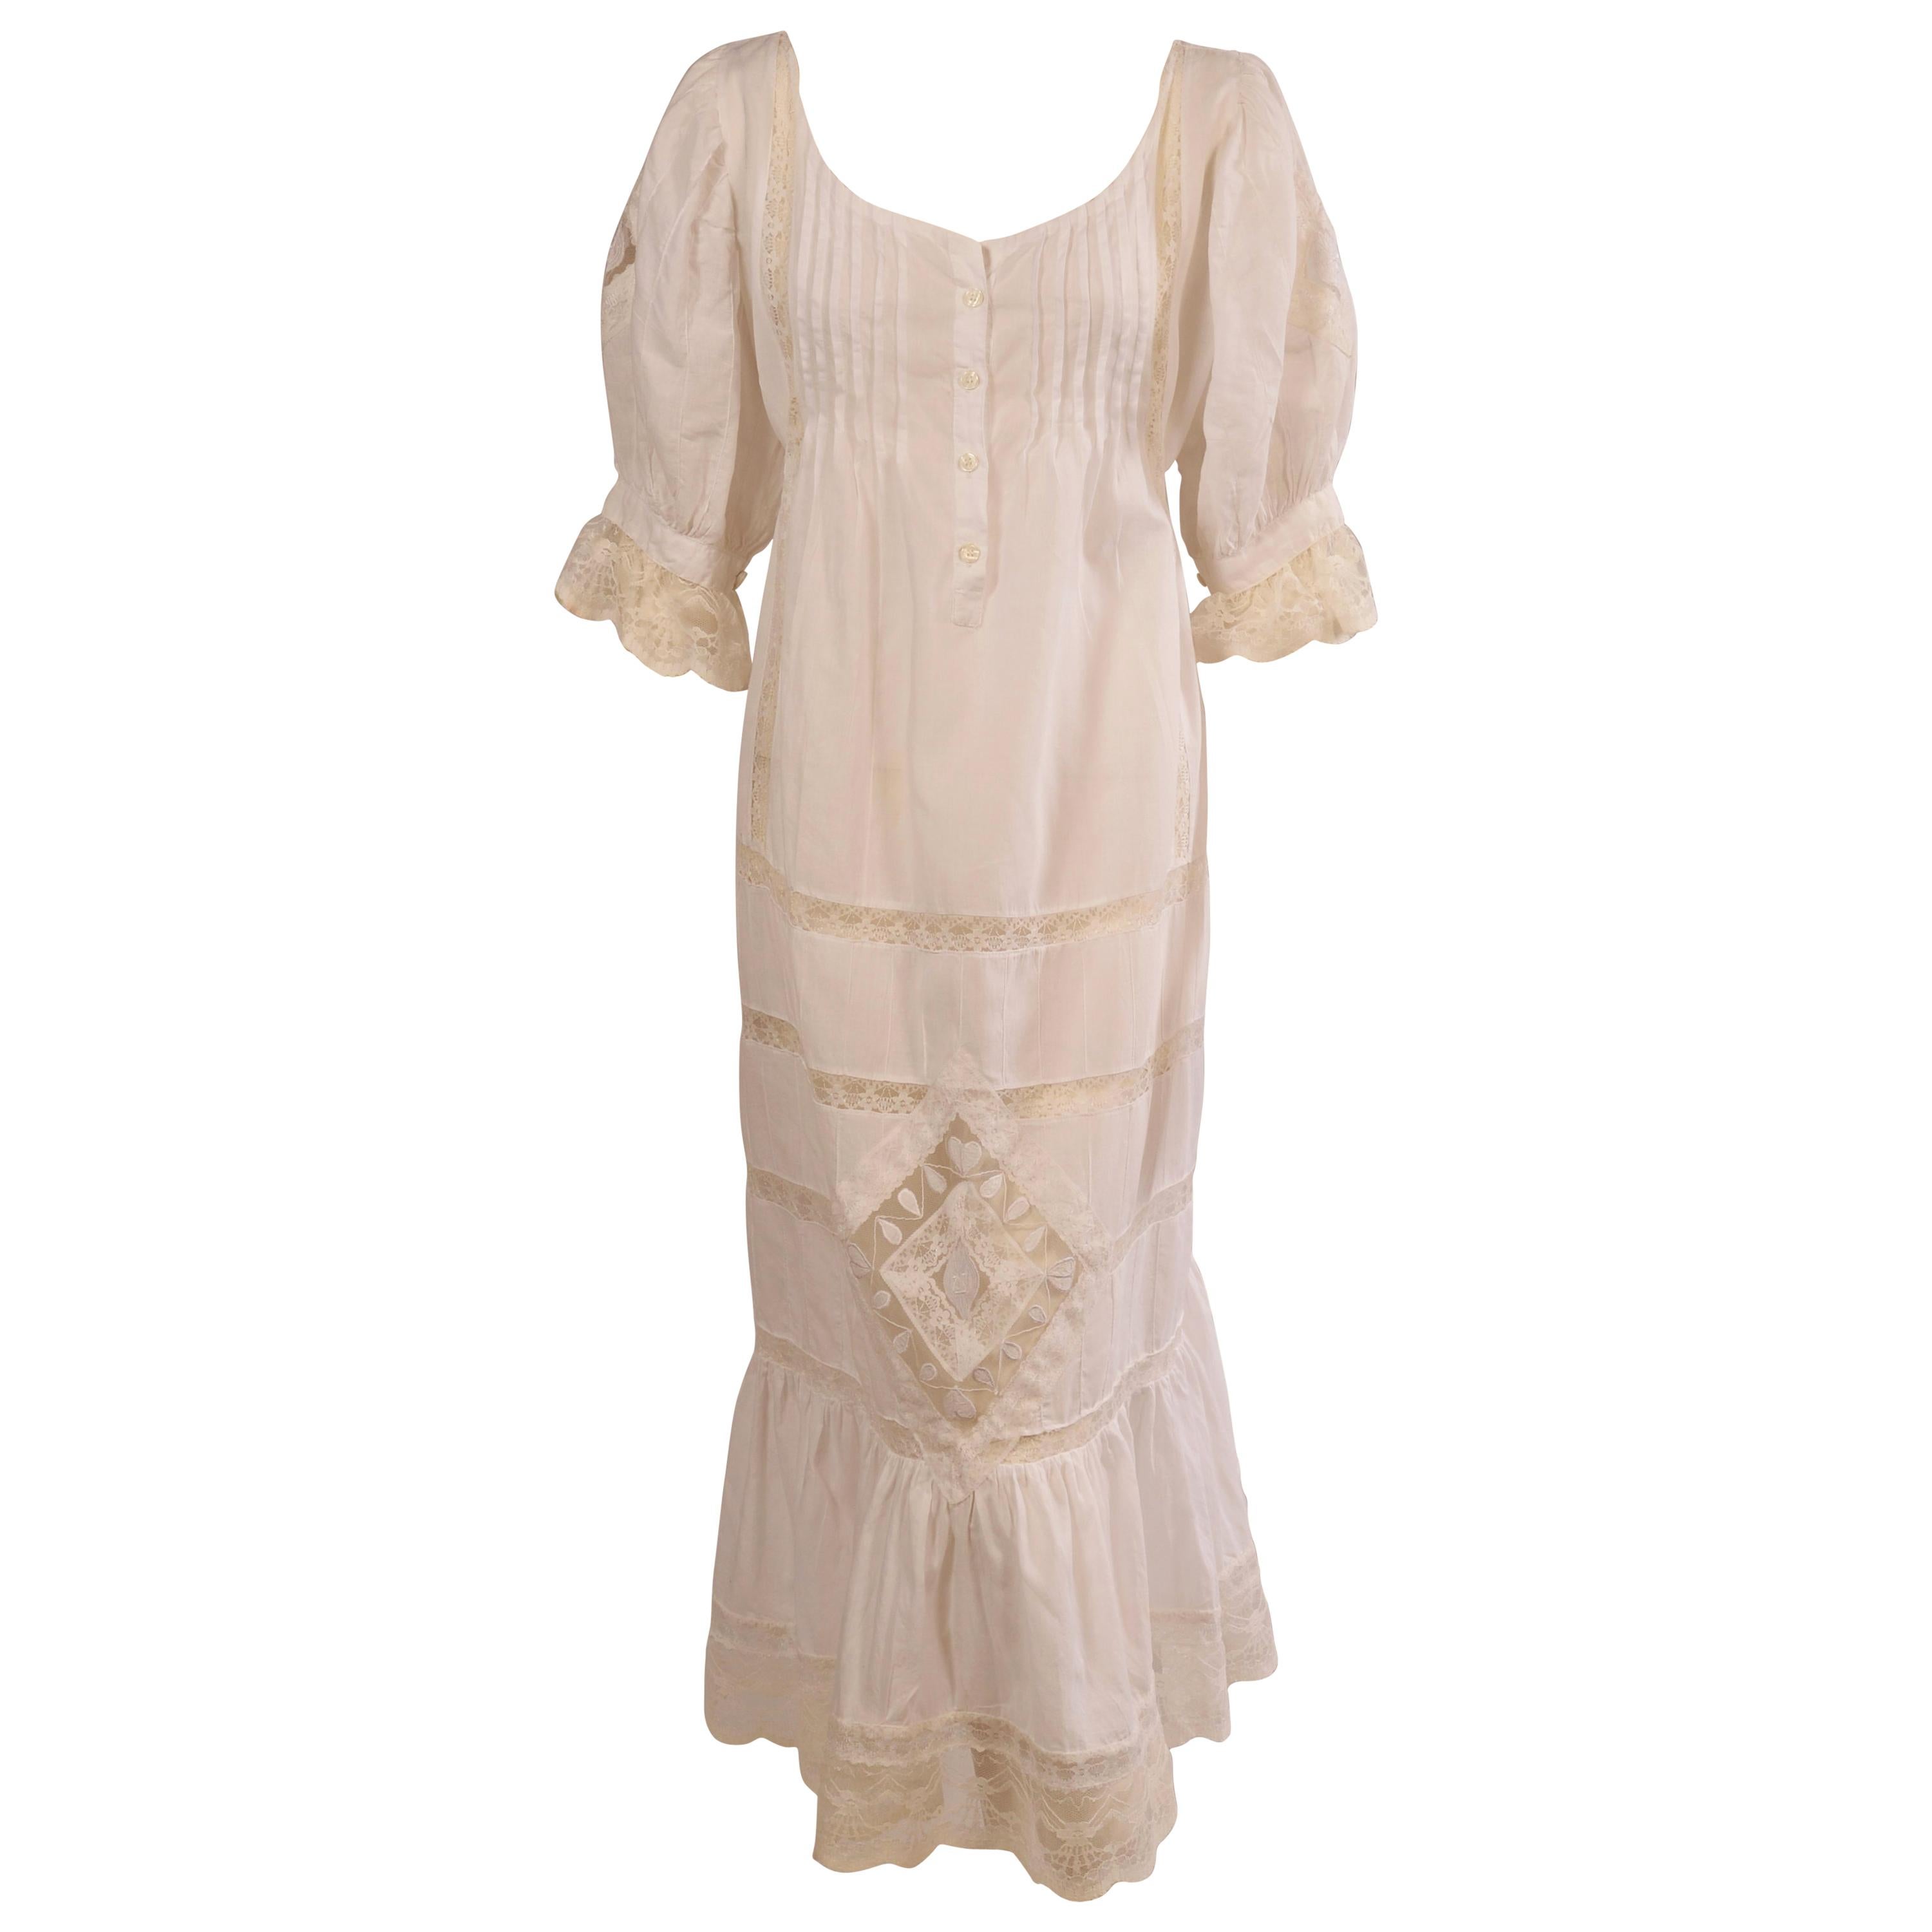 Victorian Inspired White Cotton and Lace Dress circa 1980 For Sale